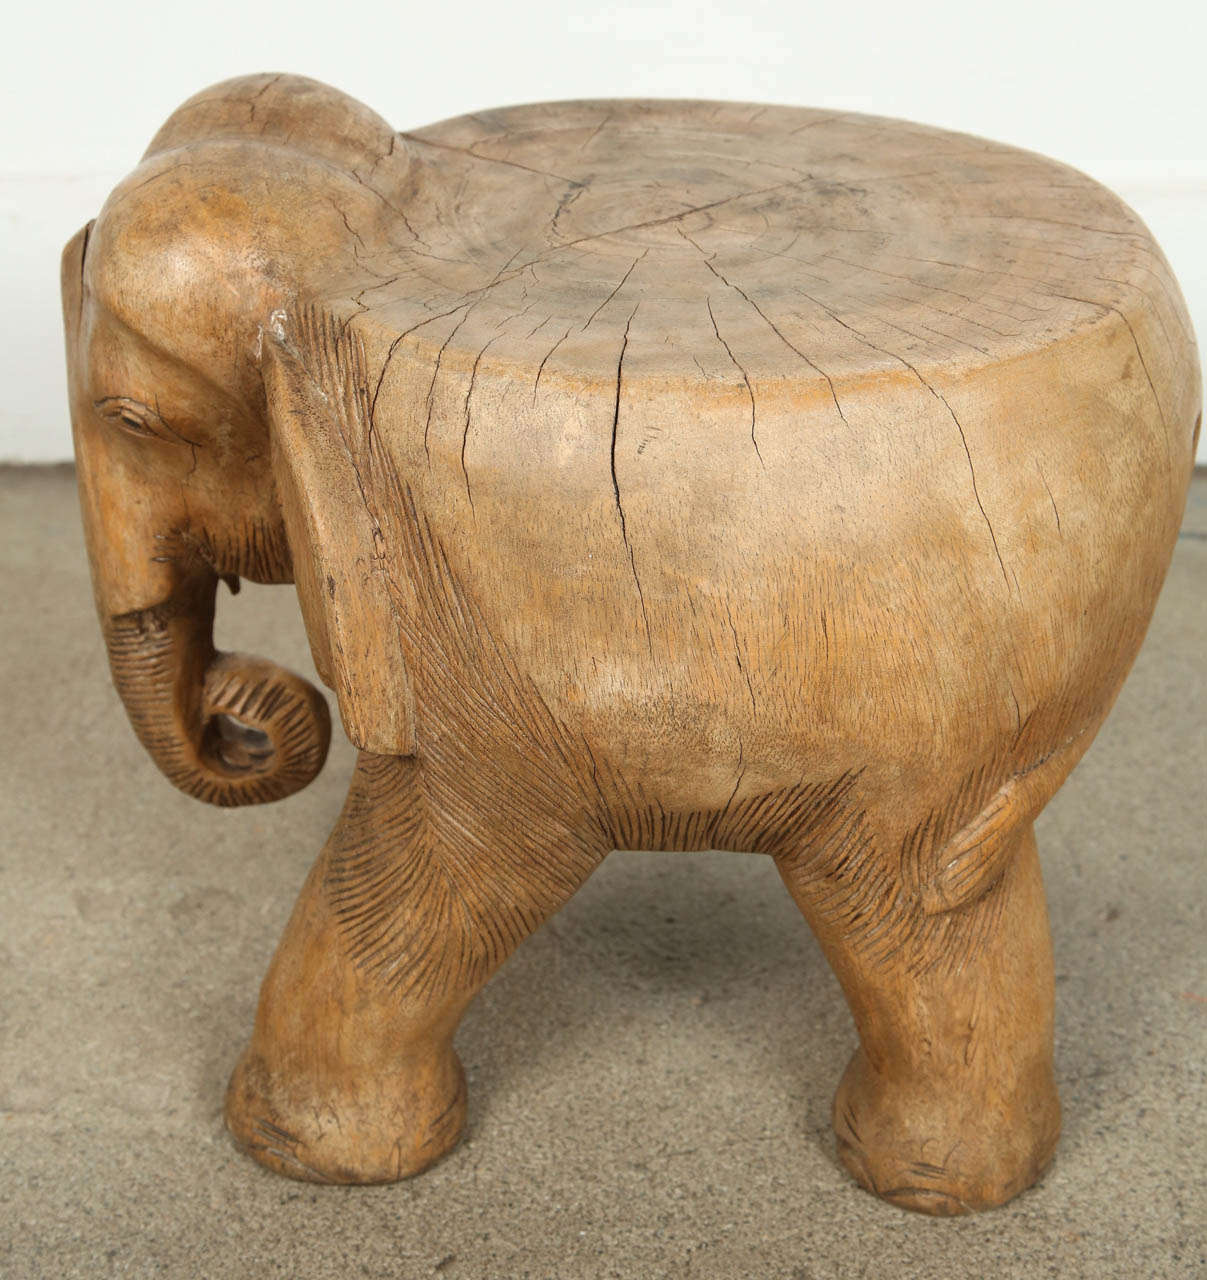 Hand-carved wooden Elephant stool, or occasional table, very nice abstract hand-carved on one piece of wood.
Probably from Thailand